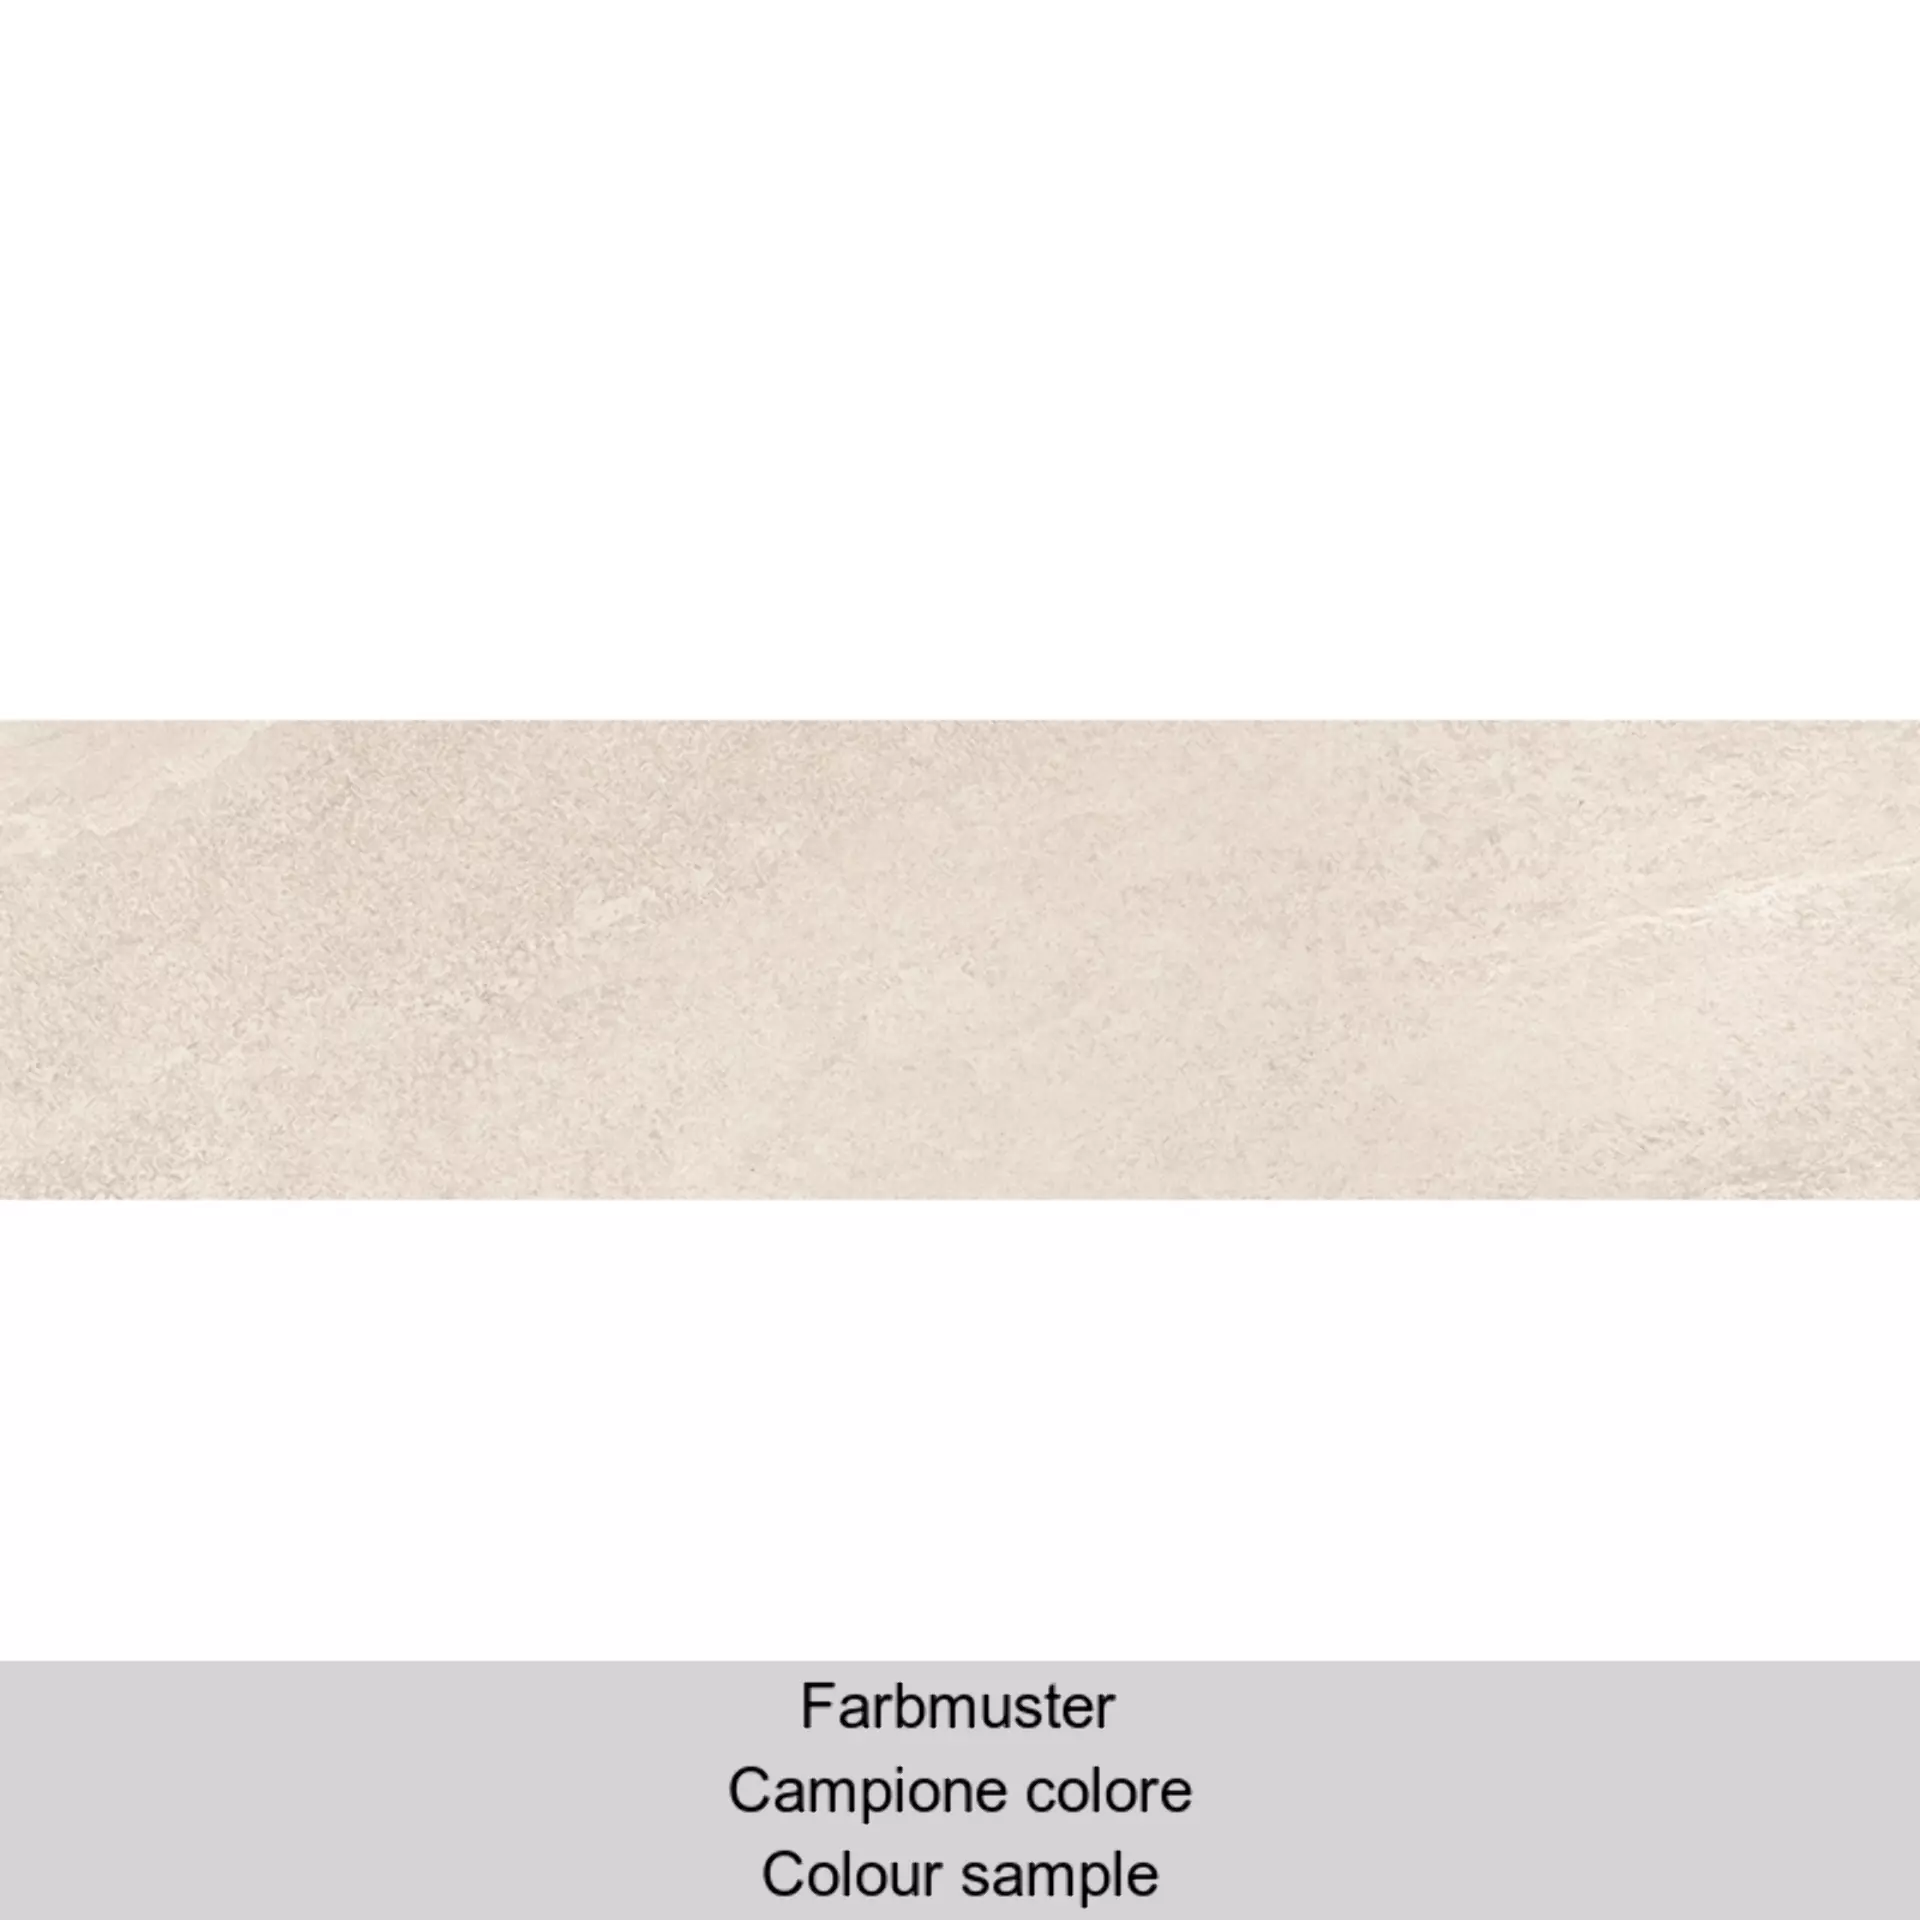 Novabell Norgestone Ivory Struttura Cesello NST811R 30x120cm rectified 9mm